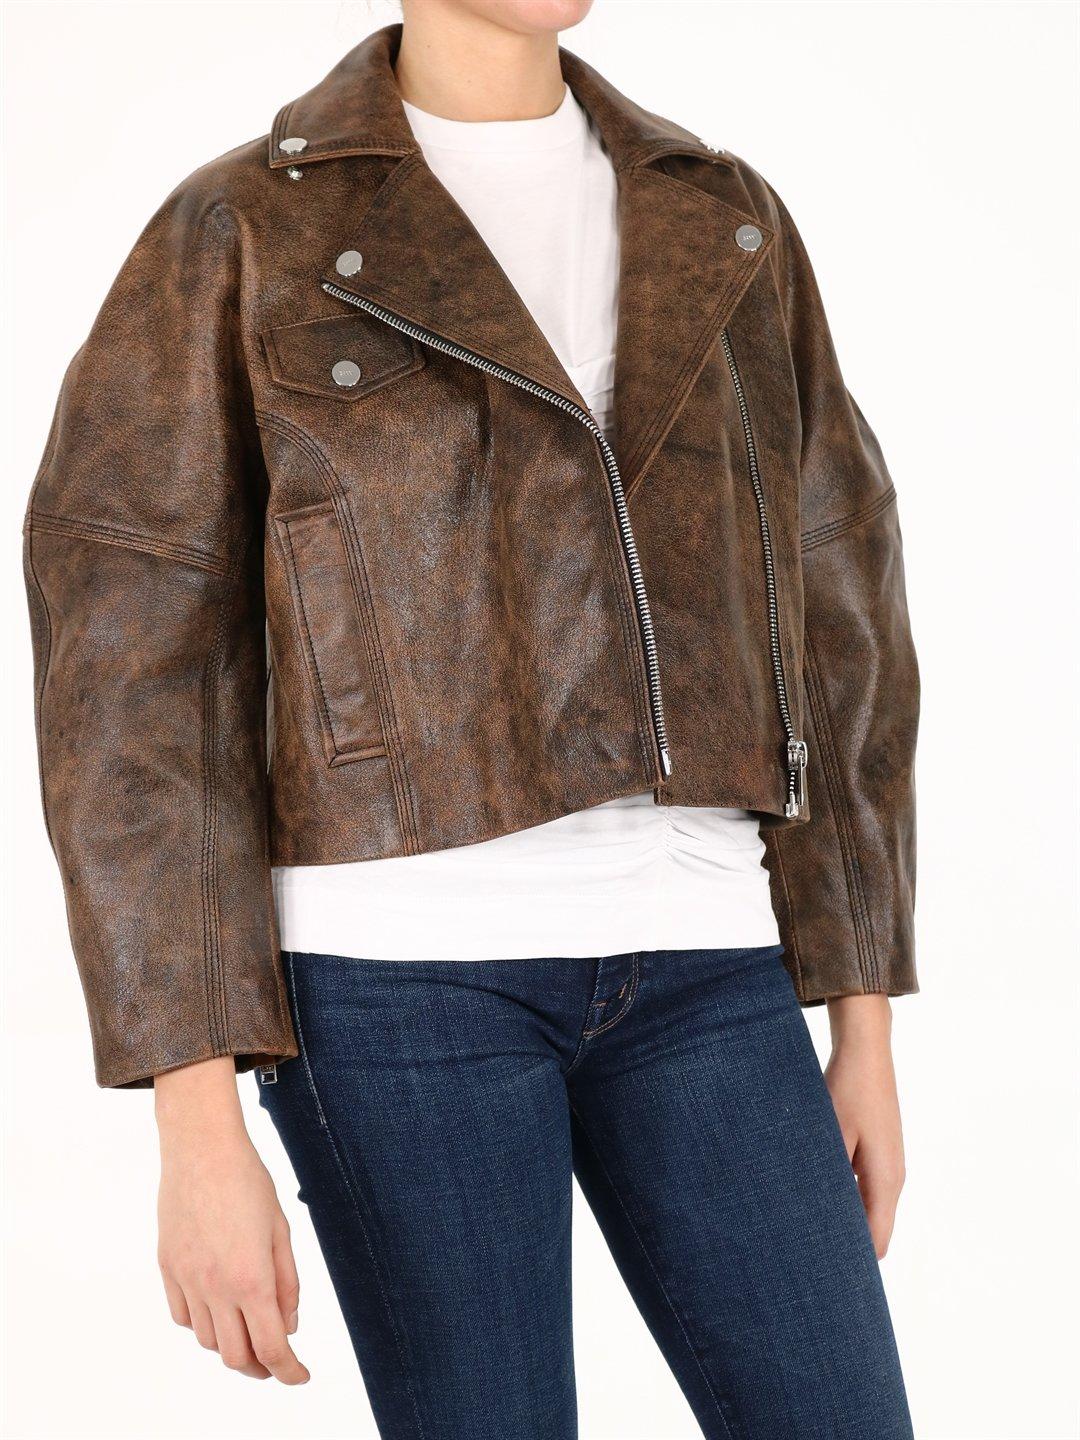 Ganni Washed Leather Jacket in Brown - Lyst